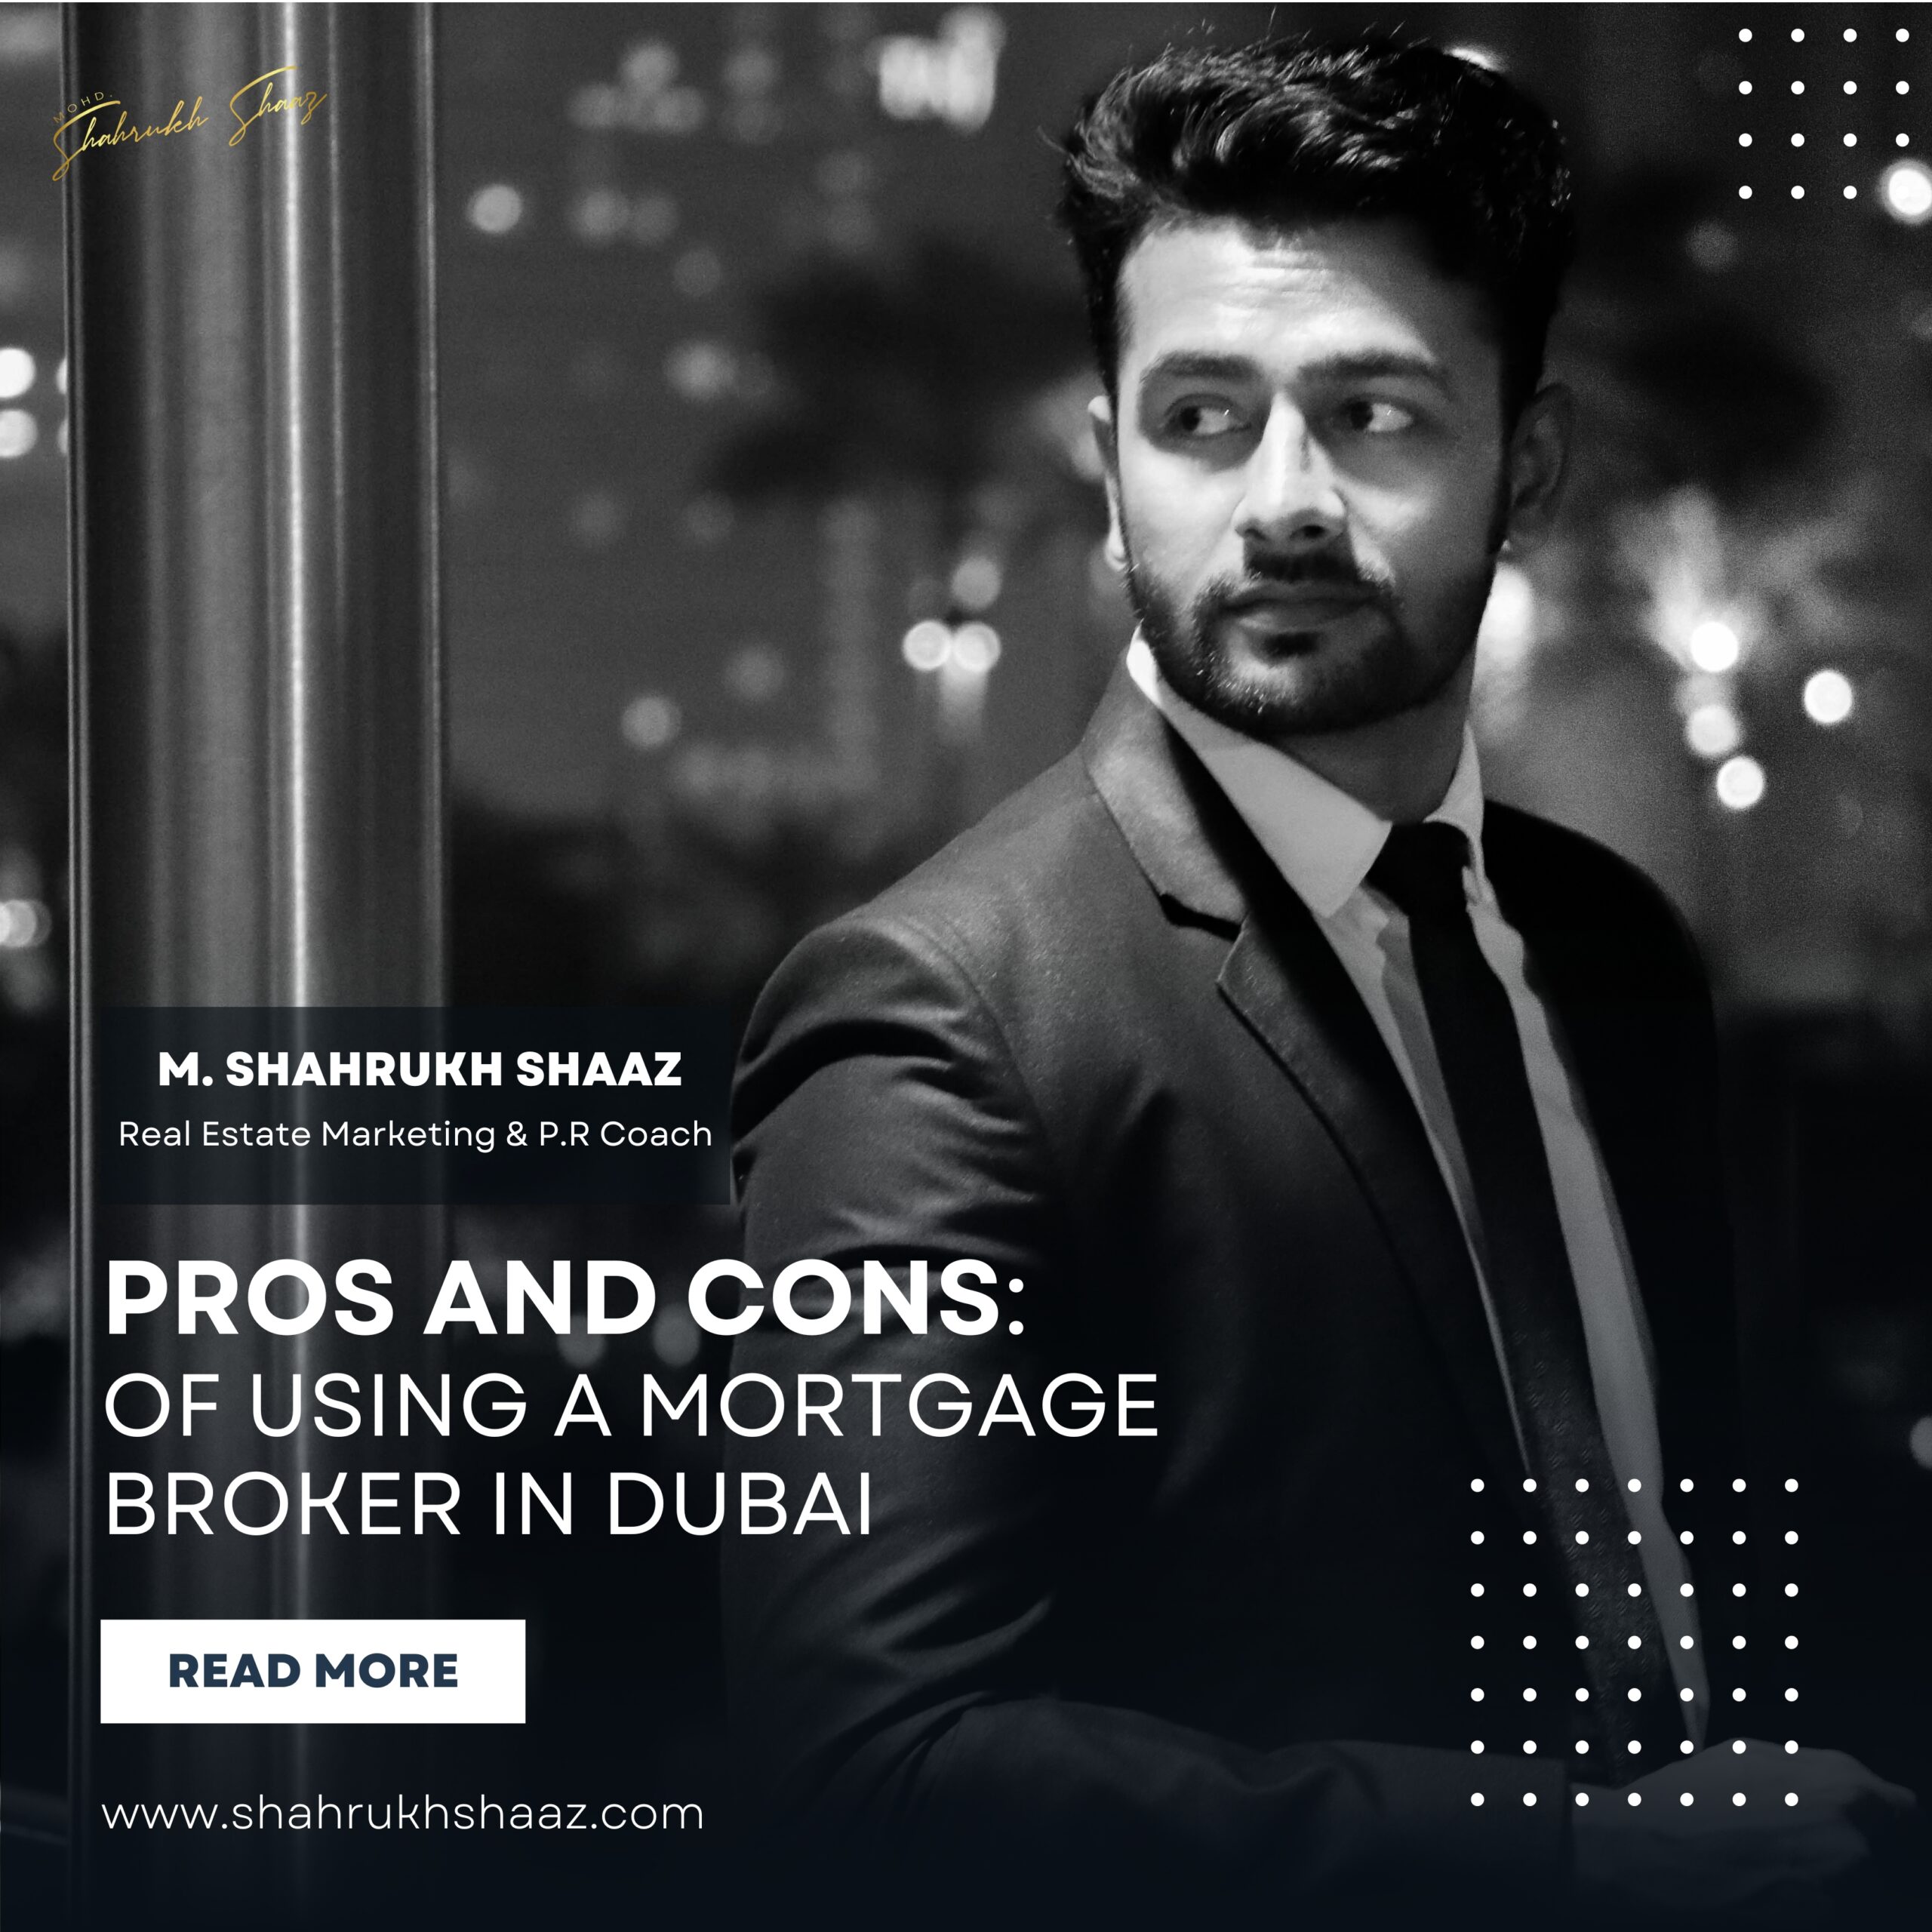 PROS AND CONS OF USING A MORTGAGE BROKER IN DUBAI. M. Shahrukh Shaaz